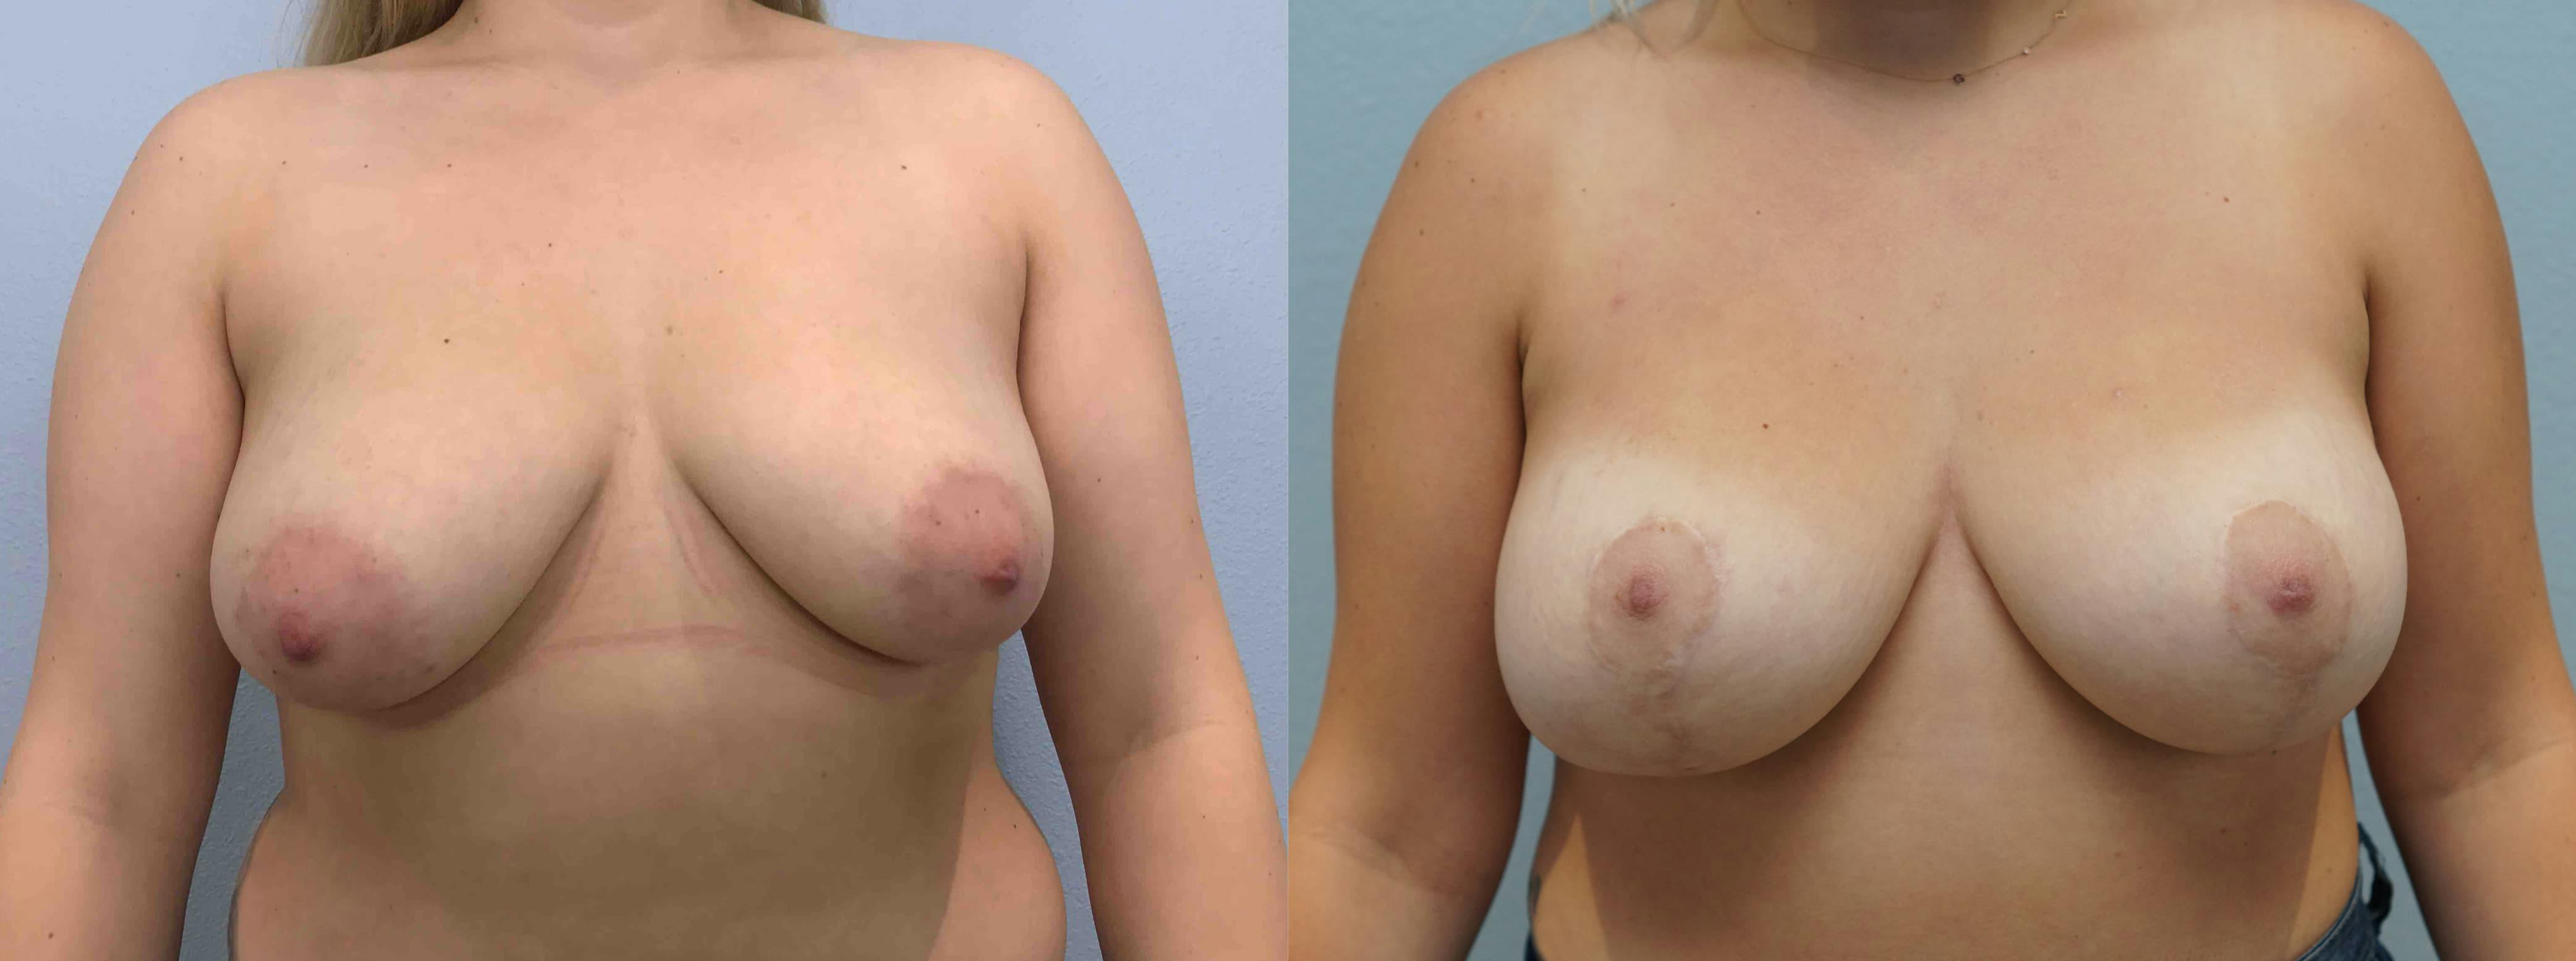 Breast Lift With Implants Gallery - Patient 75539711 - Image 1